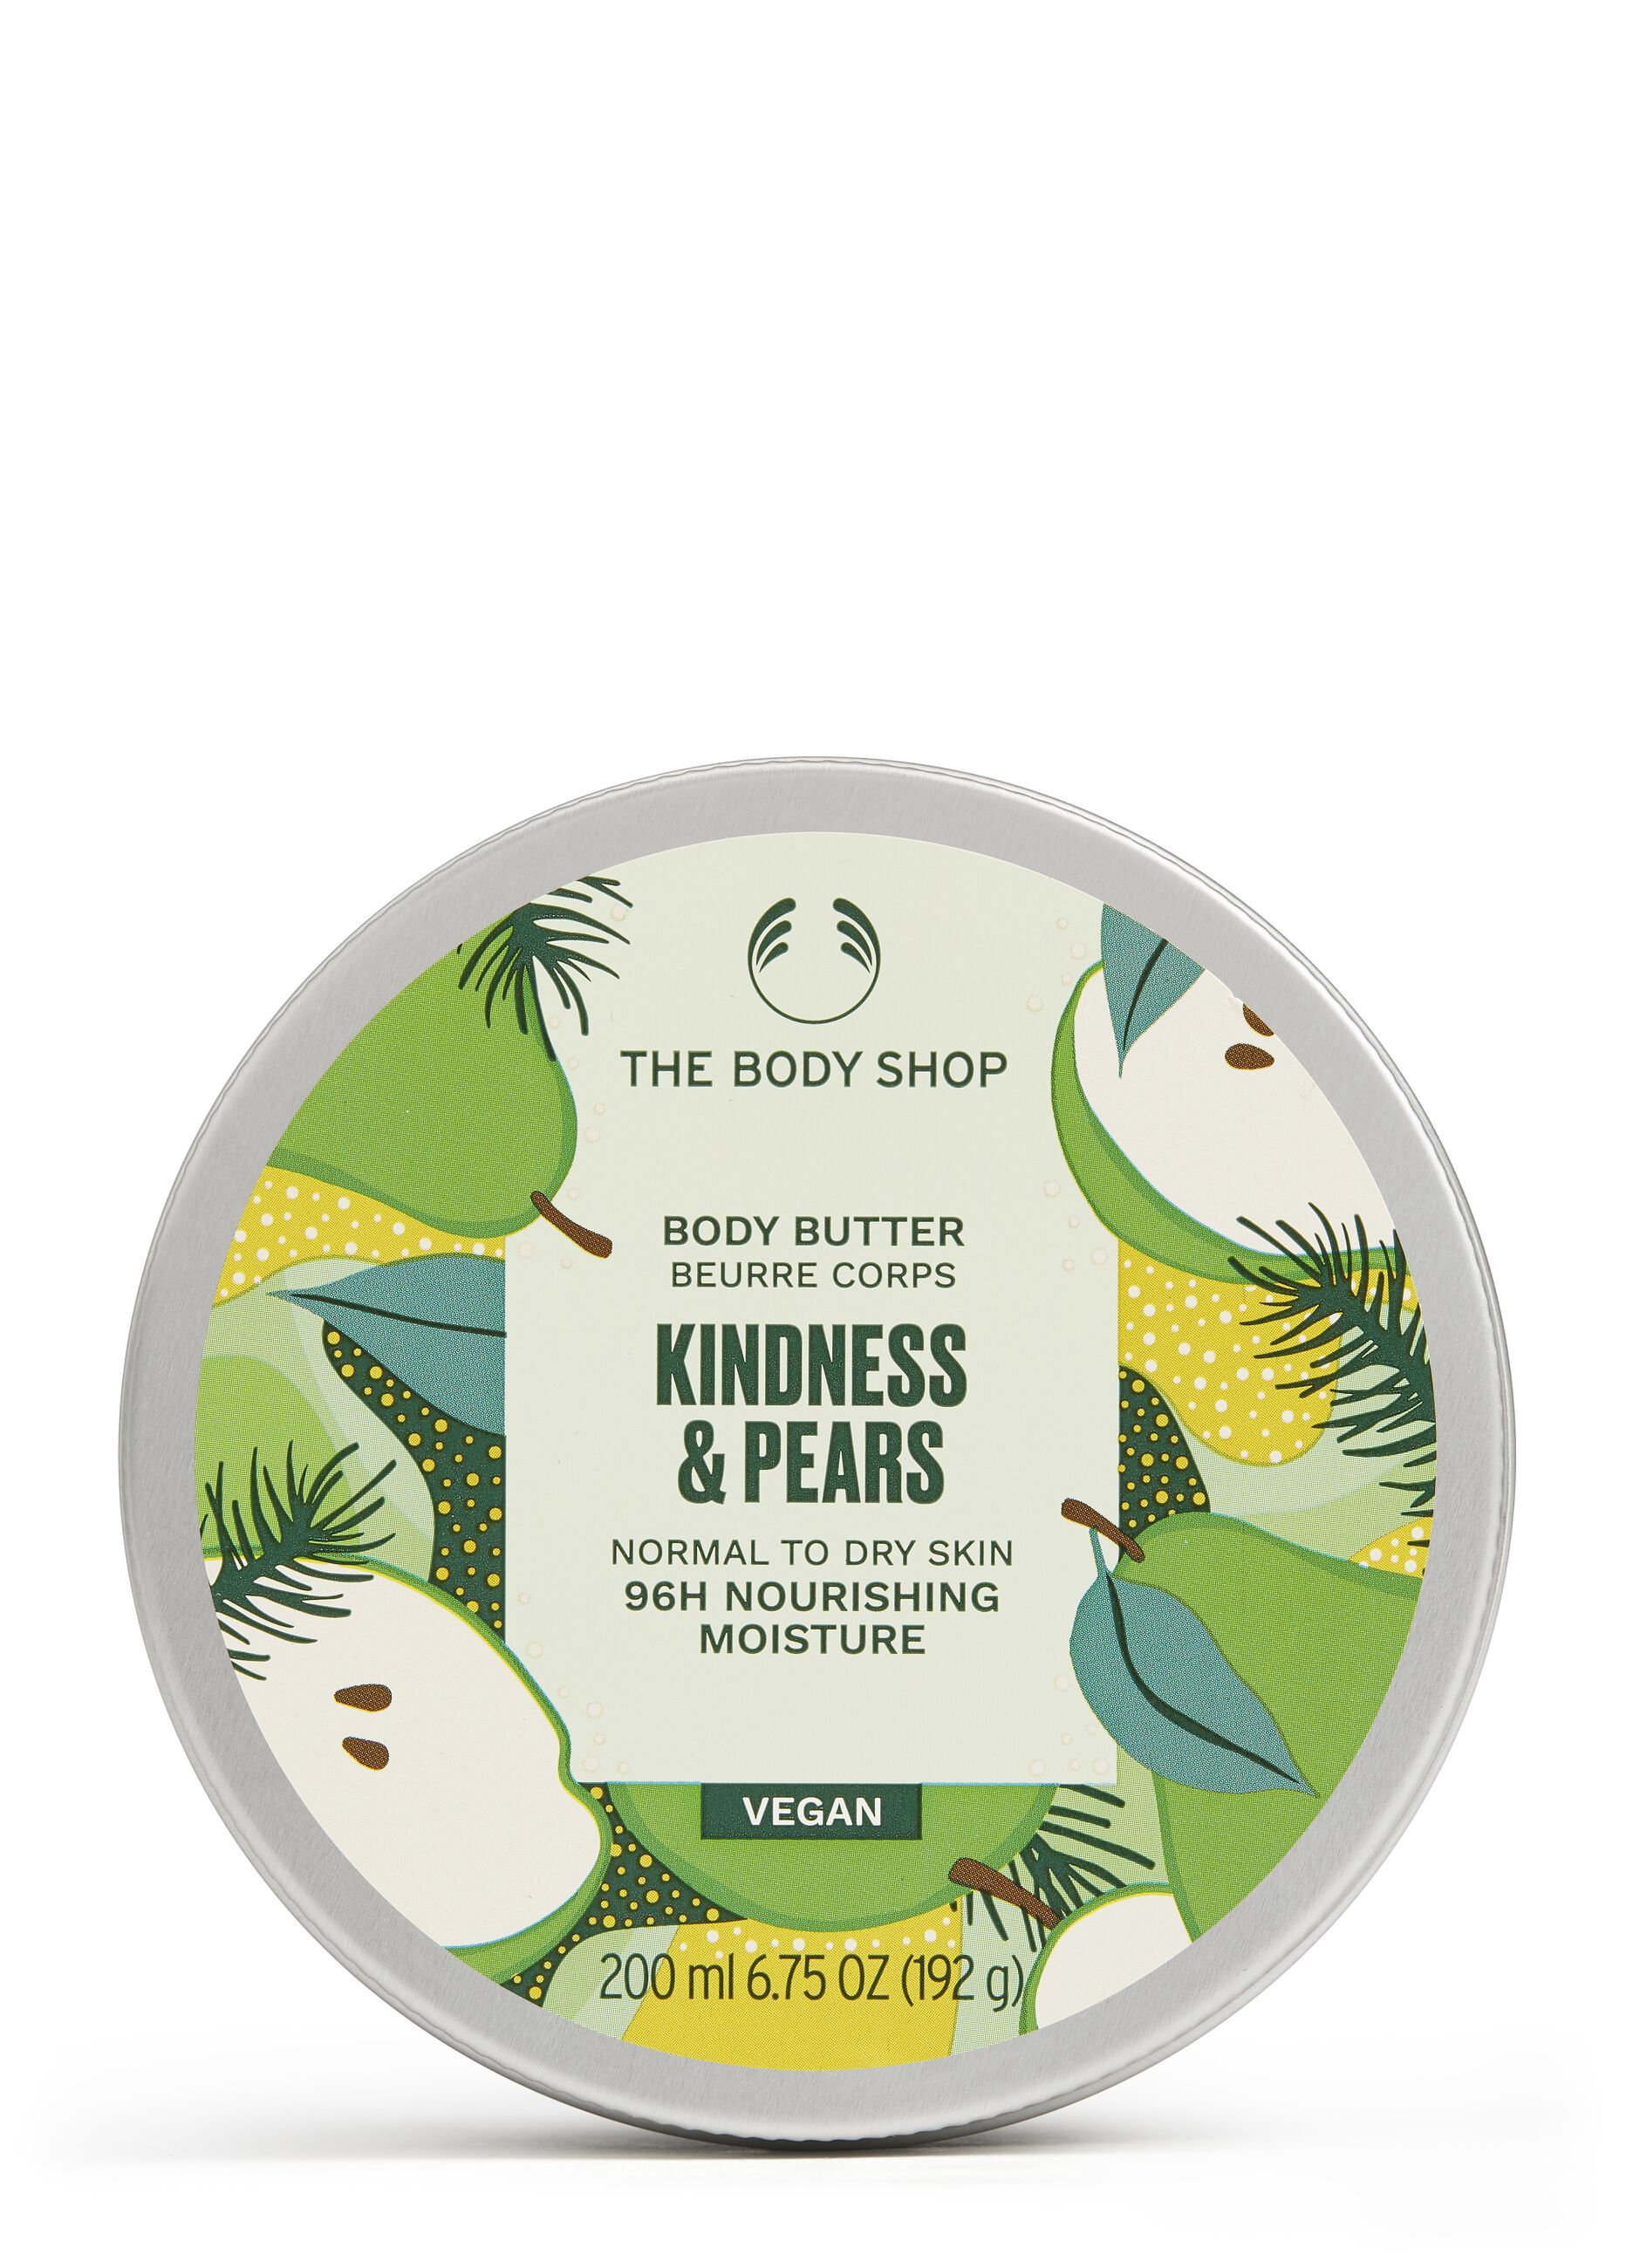 The Body Shop Kindness & Pears body butter 200ml